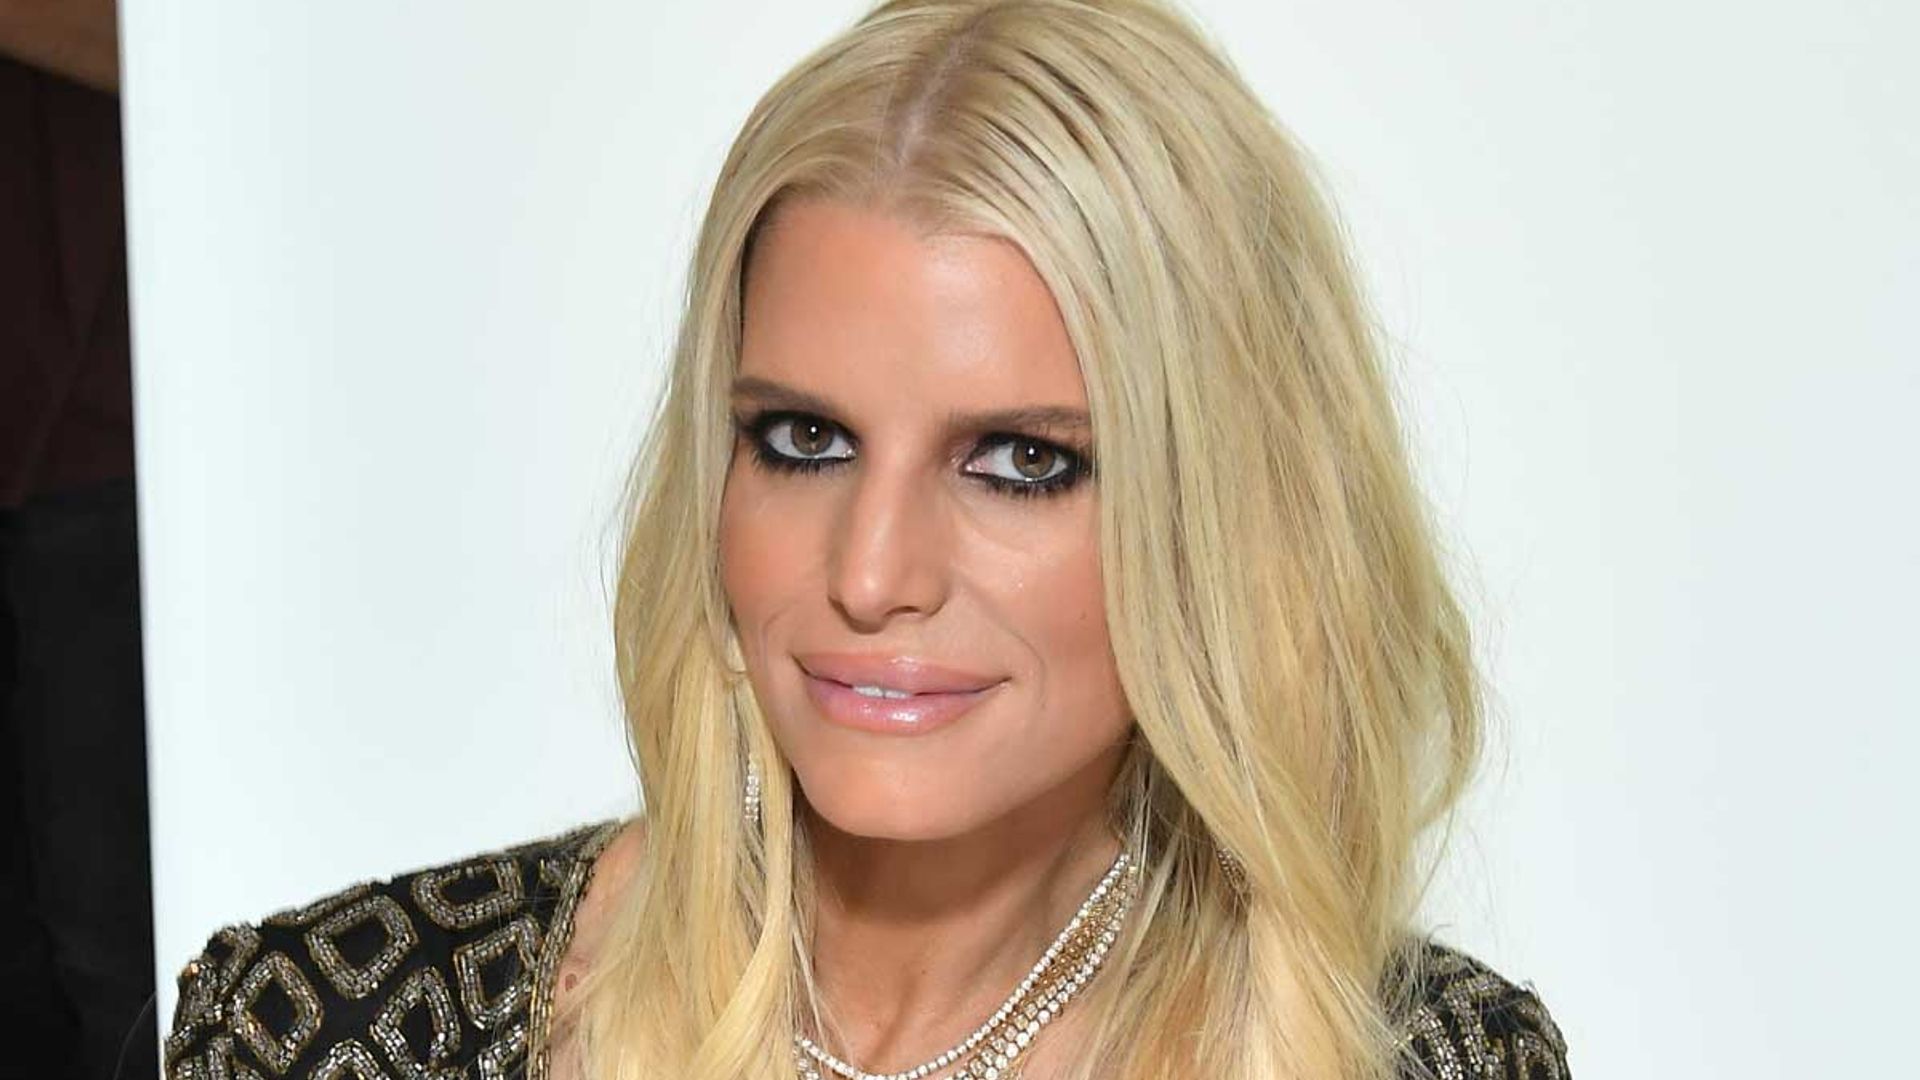 Jessica Simpson launching an activewear clothing line this fall